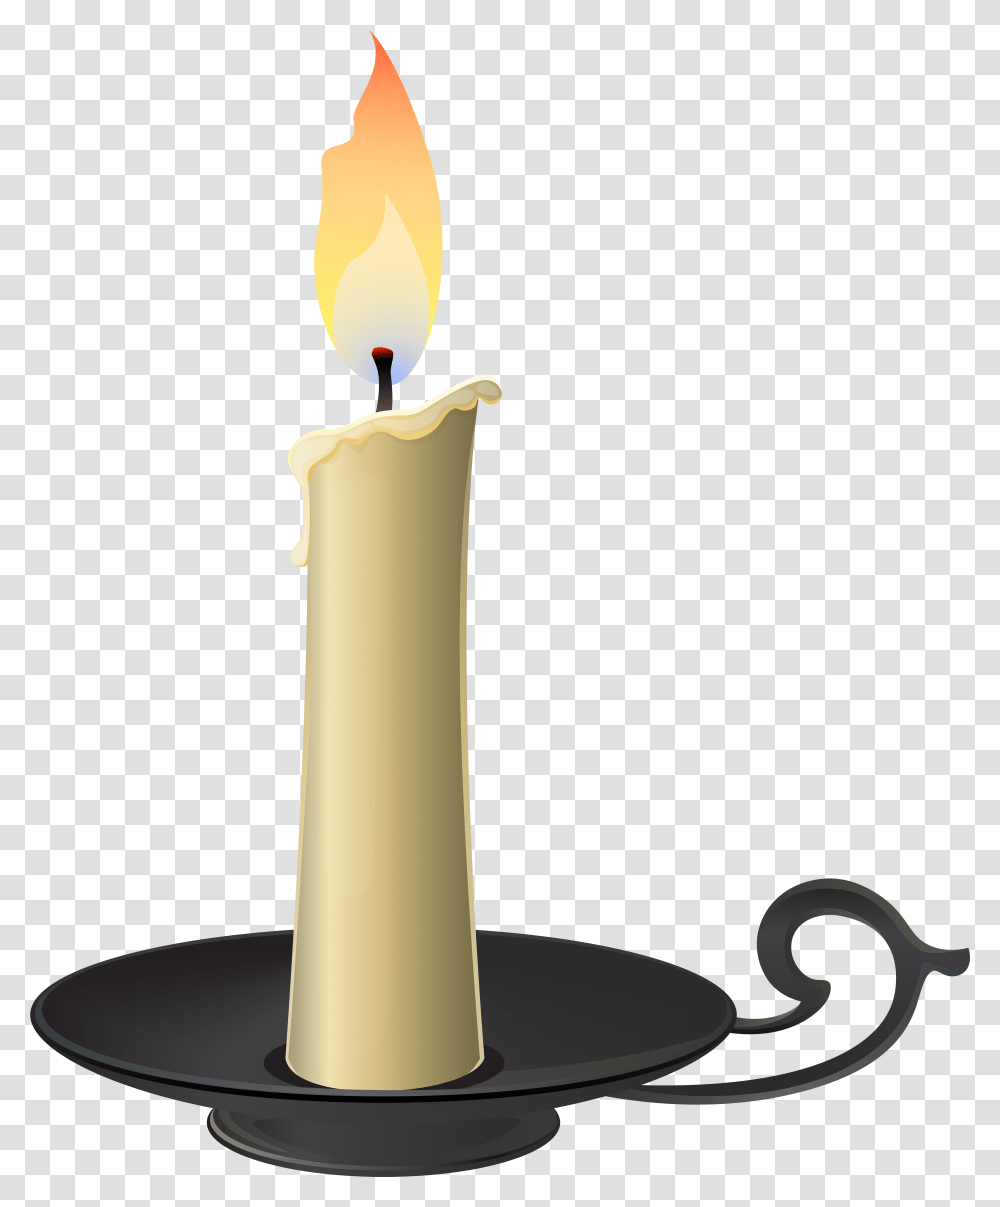 Candlestick Computer Icons Clip Art Background Candle Clipart, Lamp, Fire, Flame Transparent Png